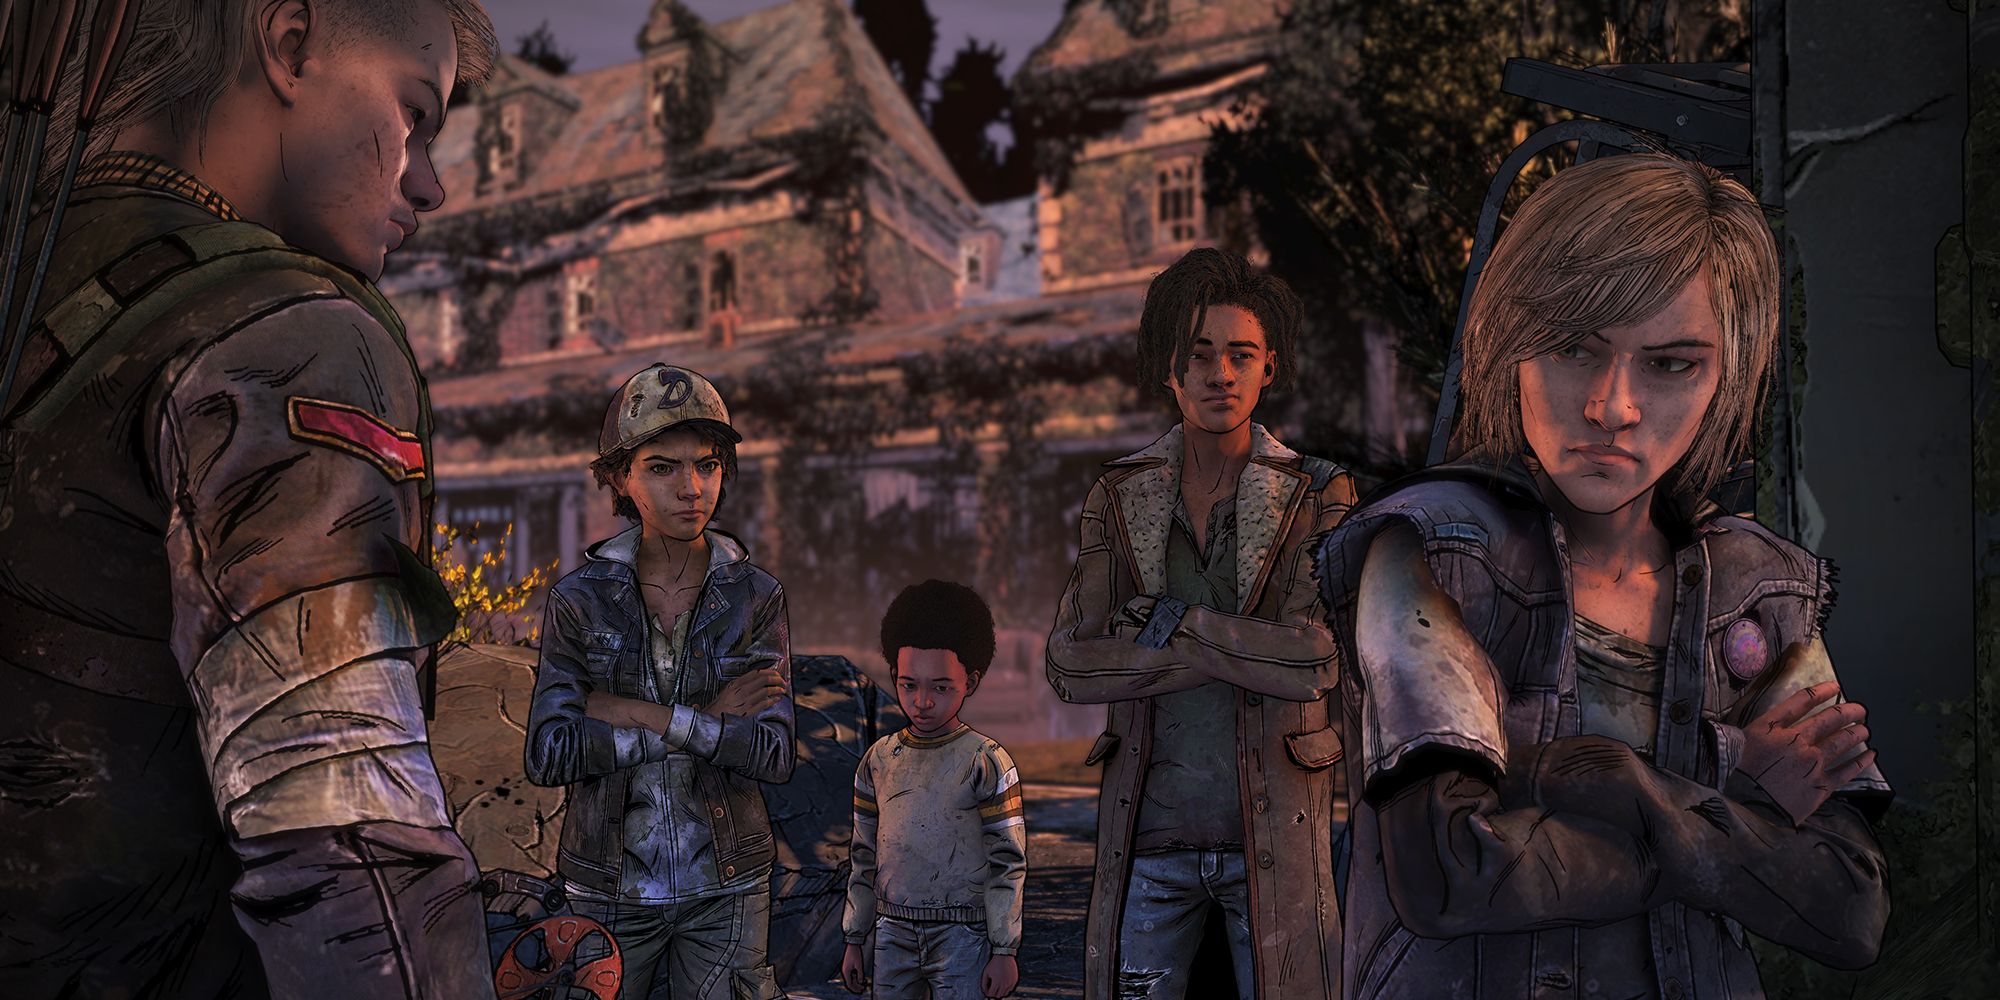 The Walking Dead The Final Season Episode 1 Review A Brutal Return to Form